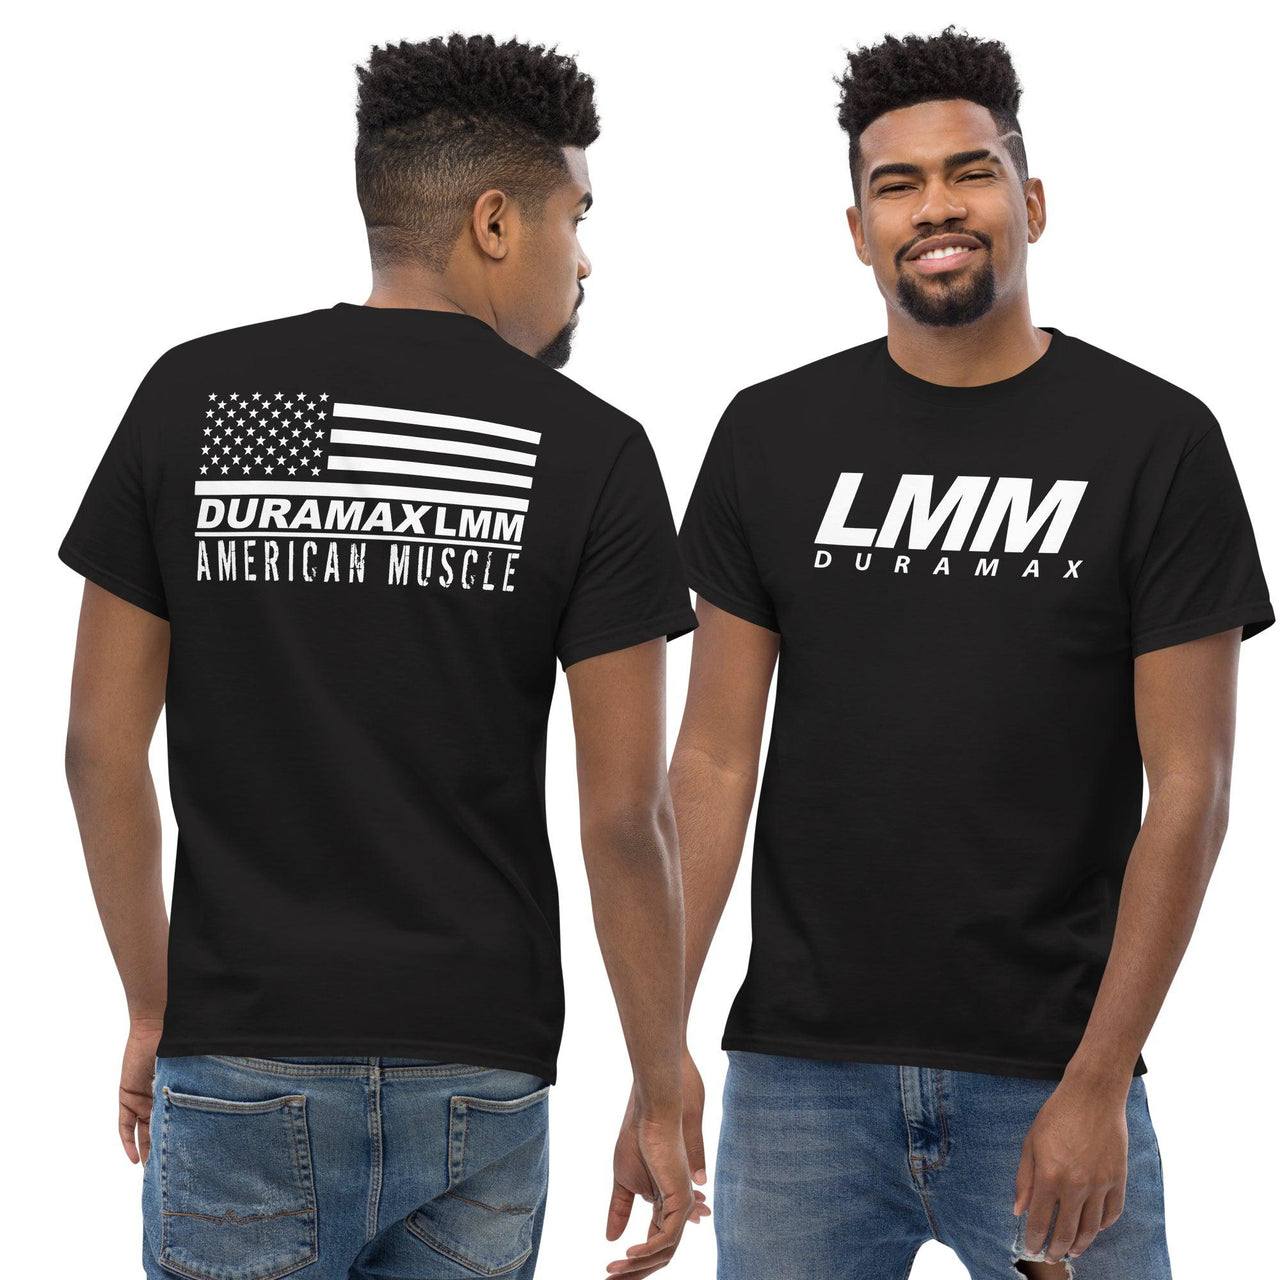 LMM Duramax T-Shirt With American Flag Design modeled in Black